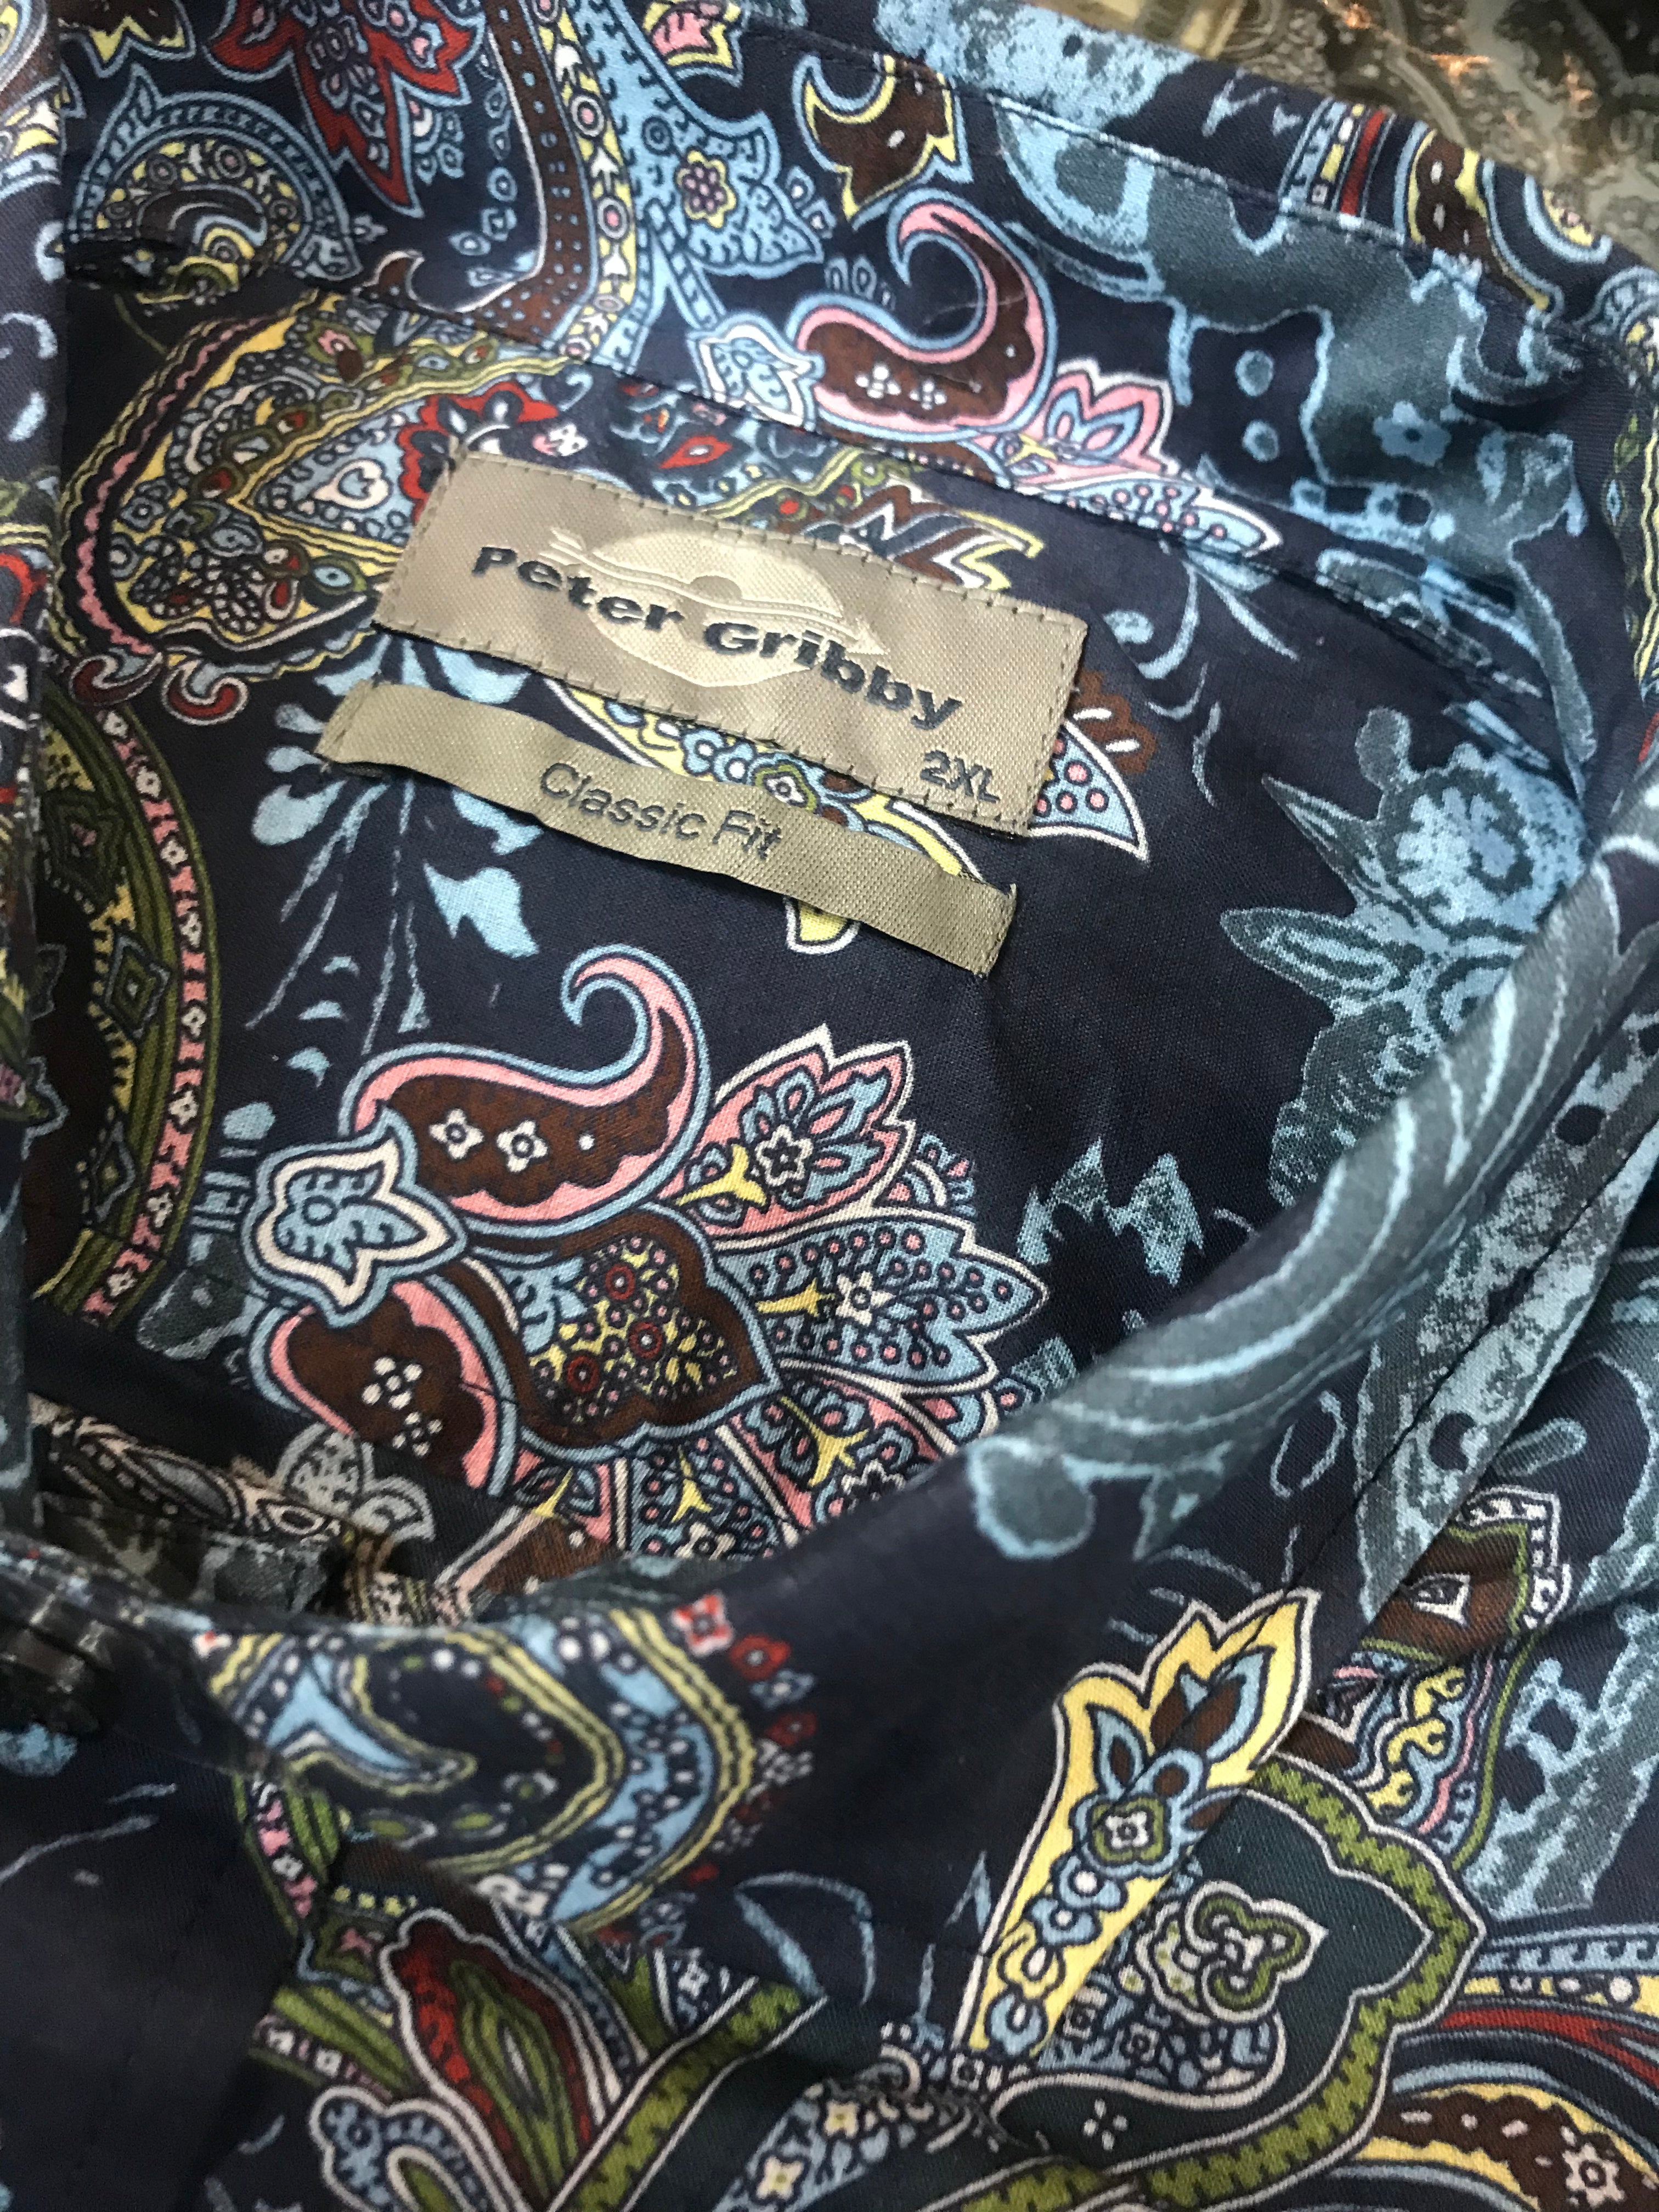 Peter Gribby king-size Paisley Patterned Men's Shirt